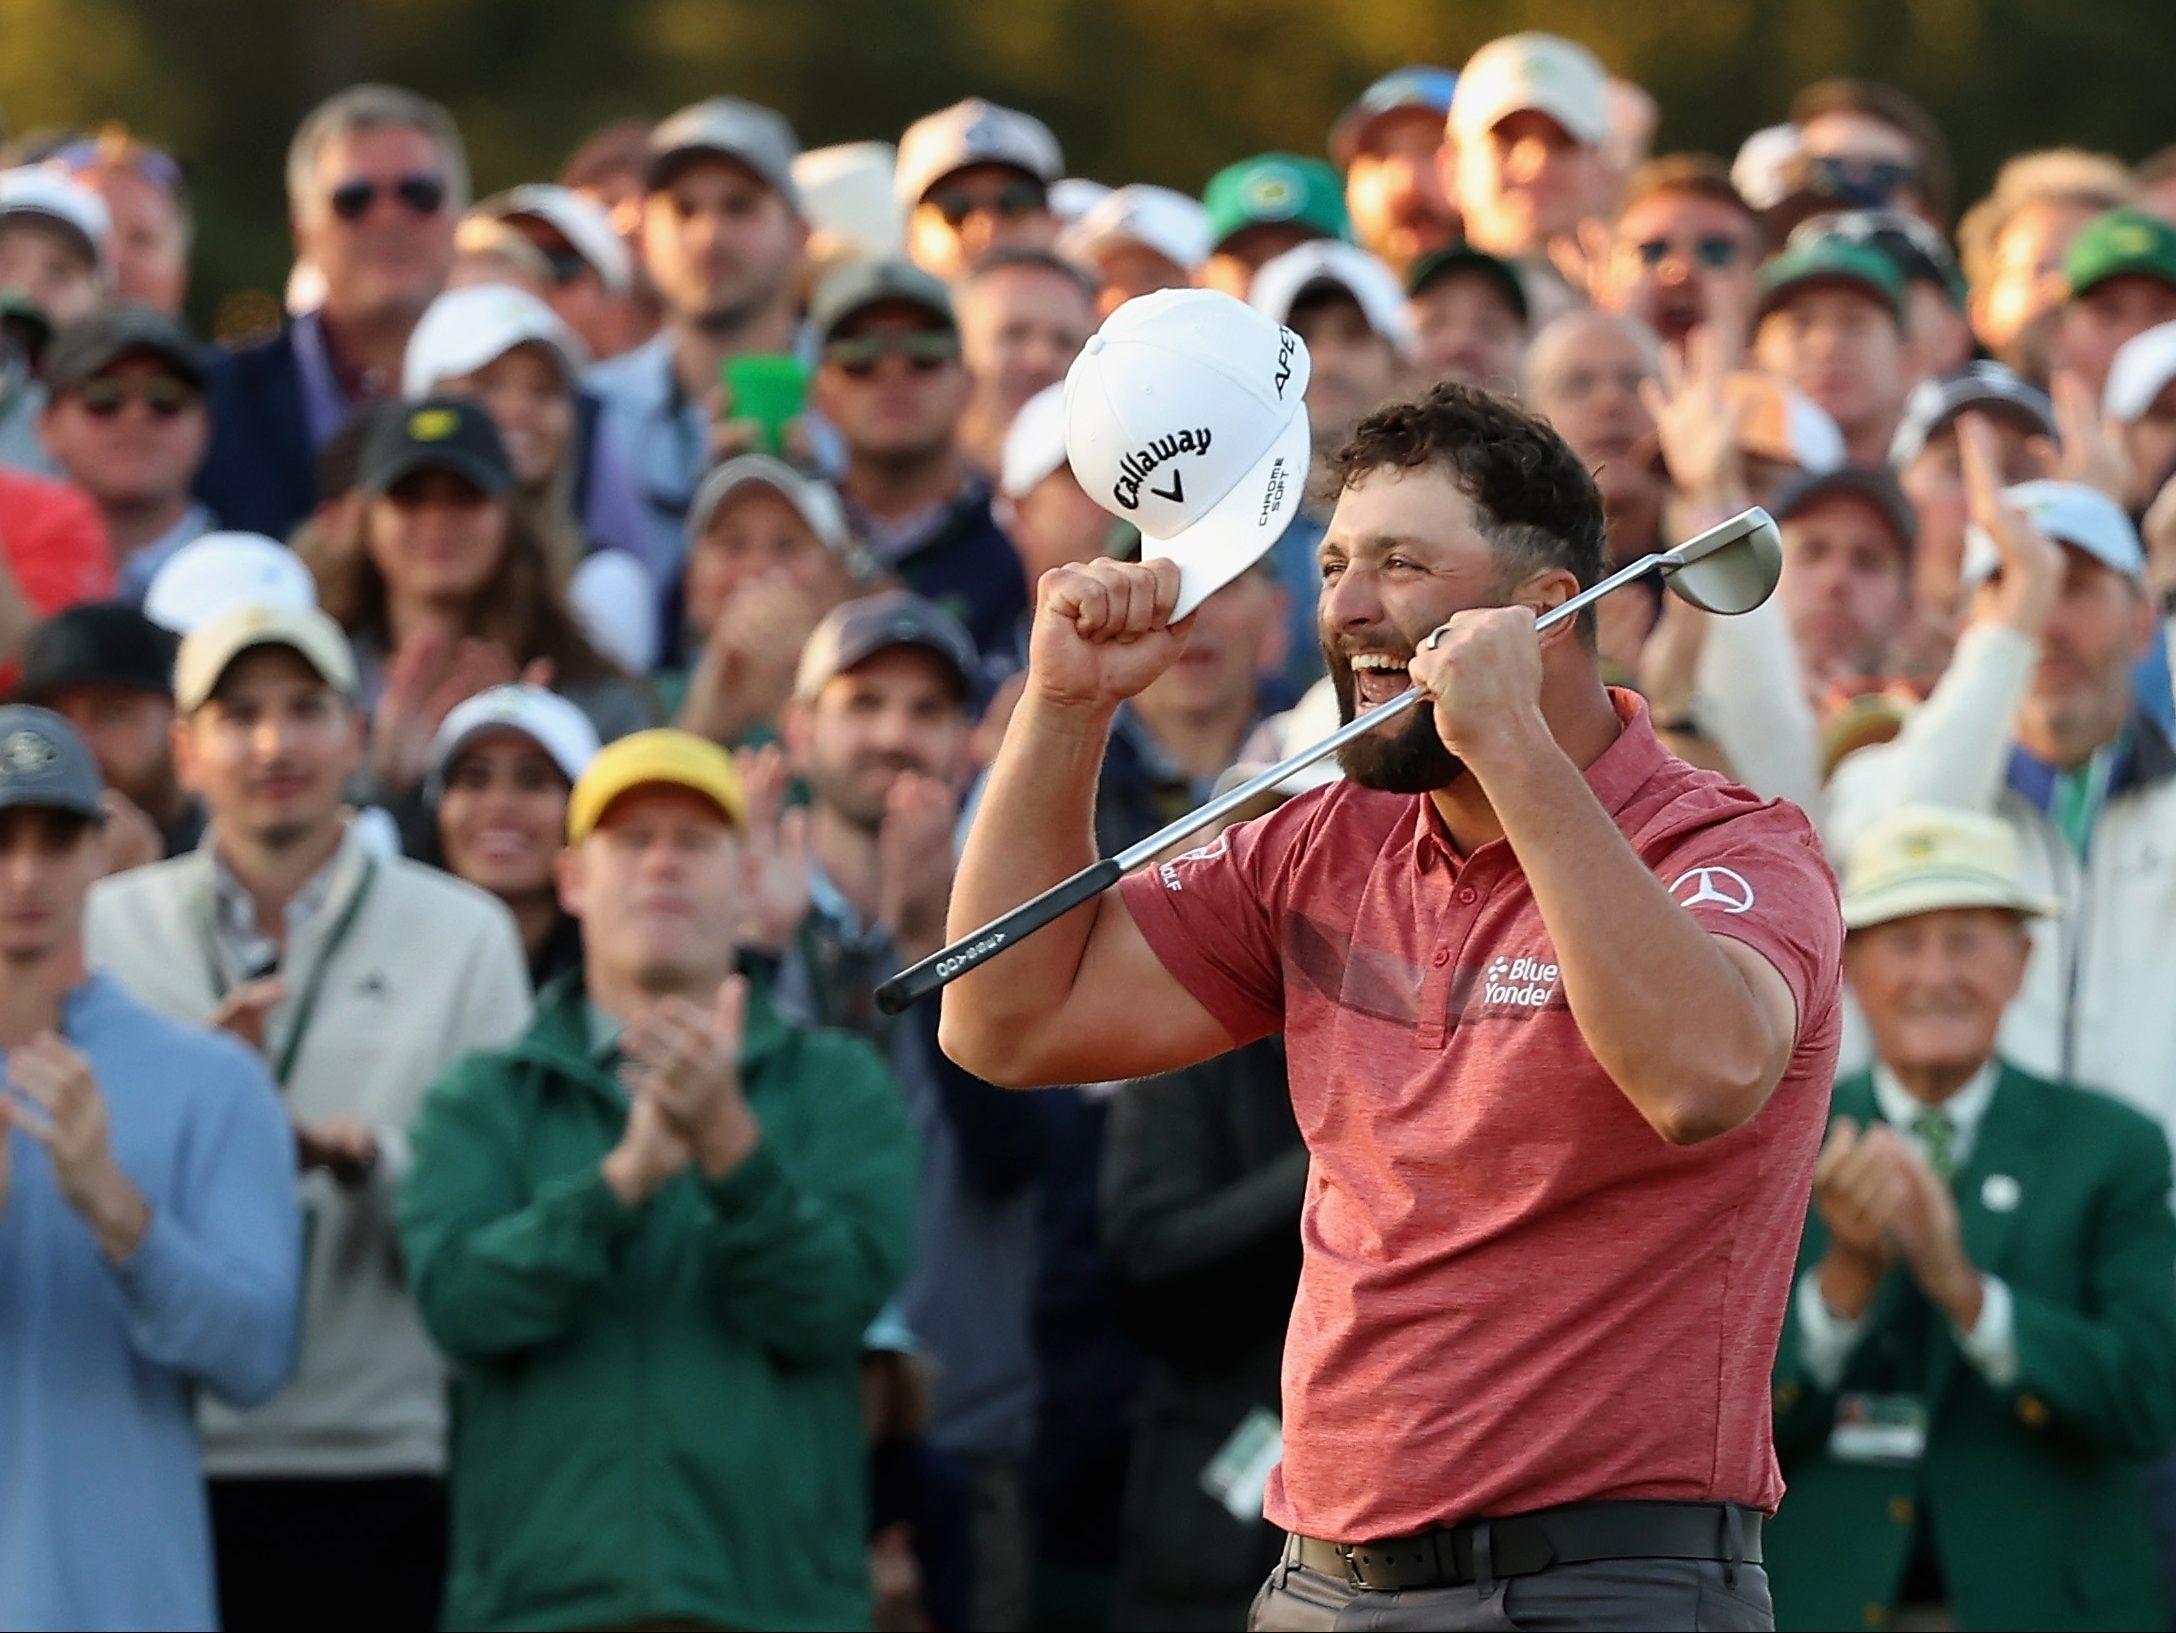 Who will win the 2023 Masters? Odds, predictions and why Jon Rahm